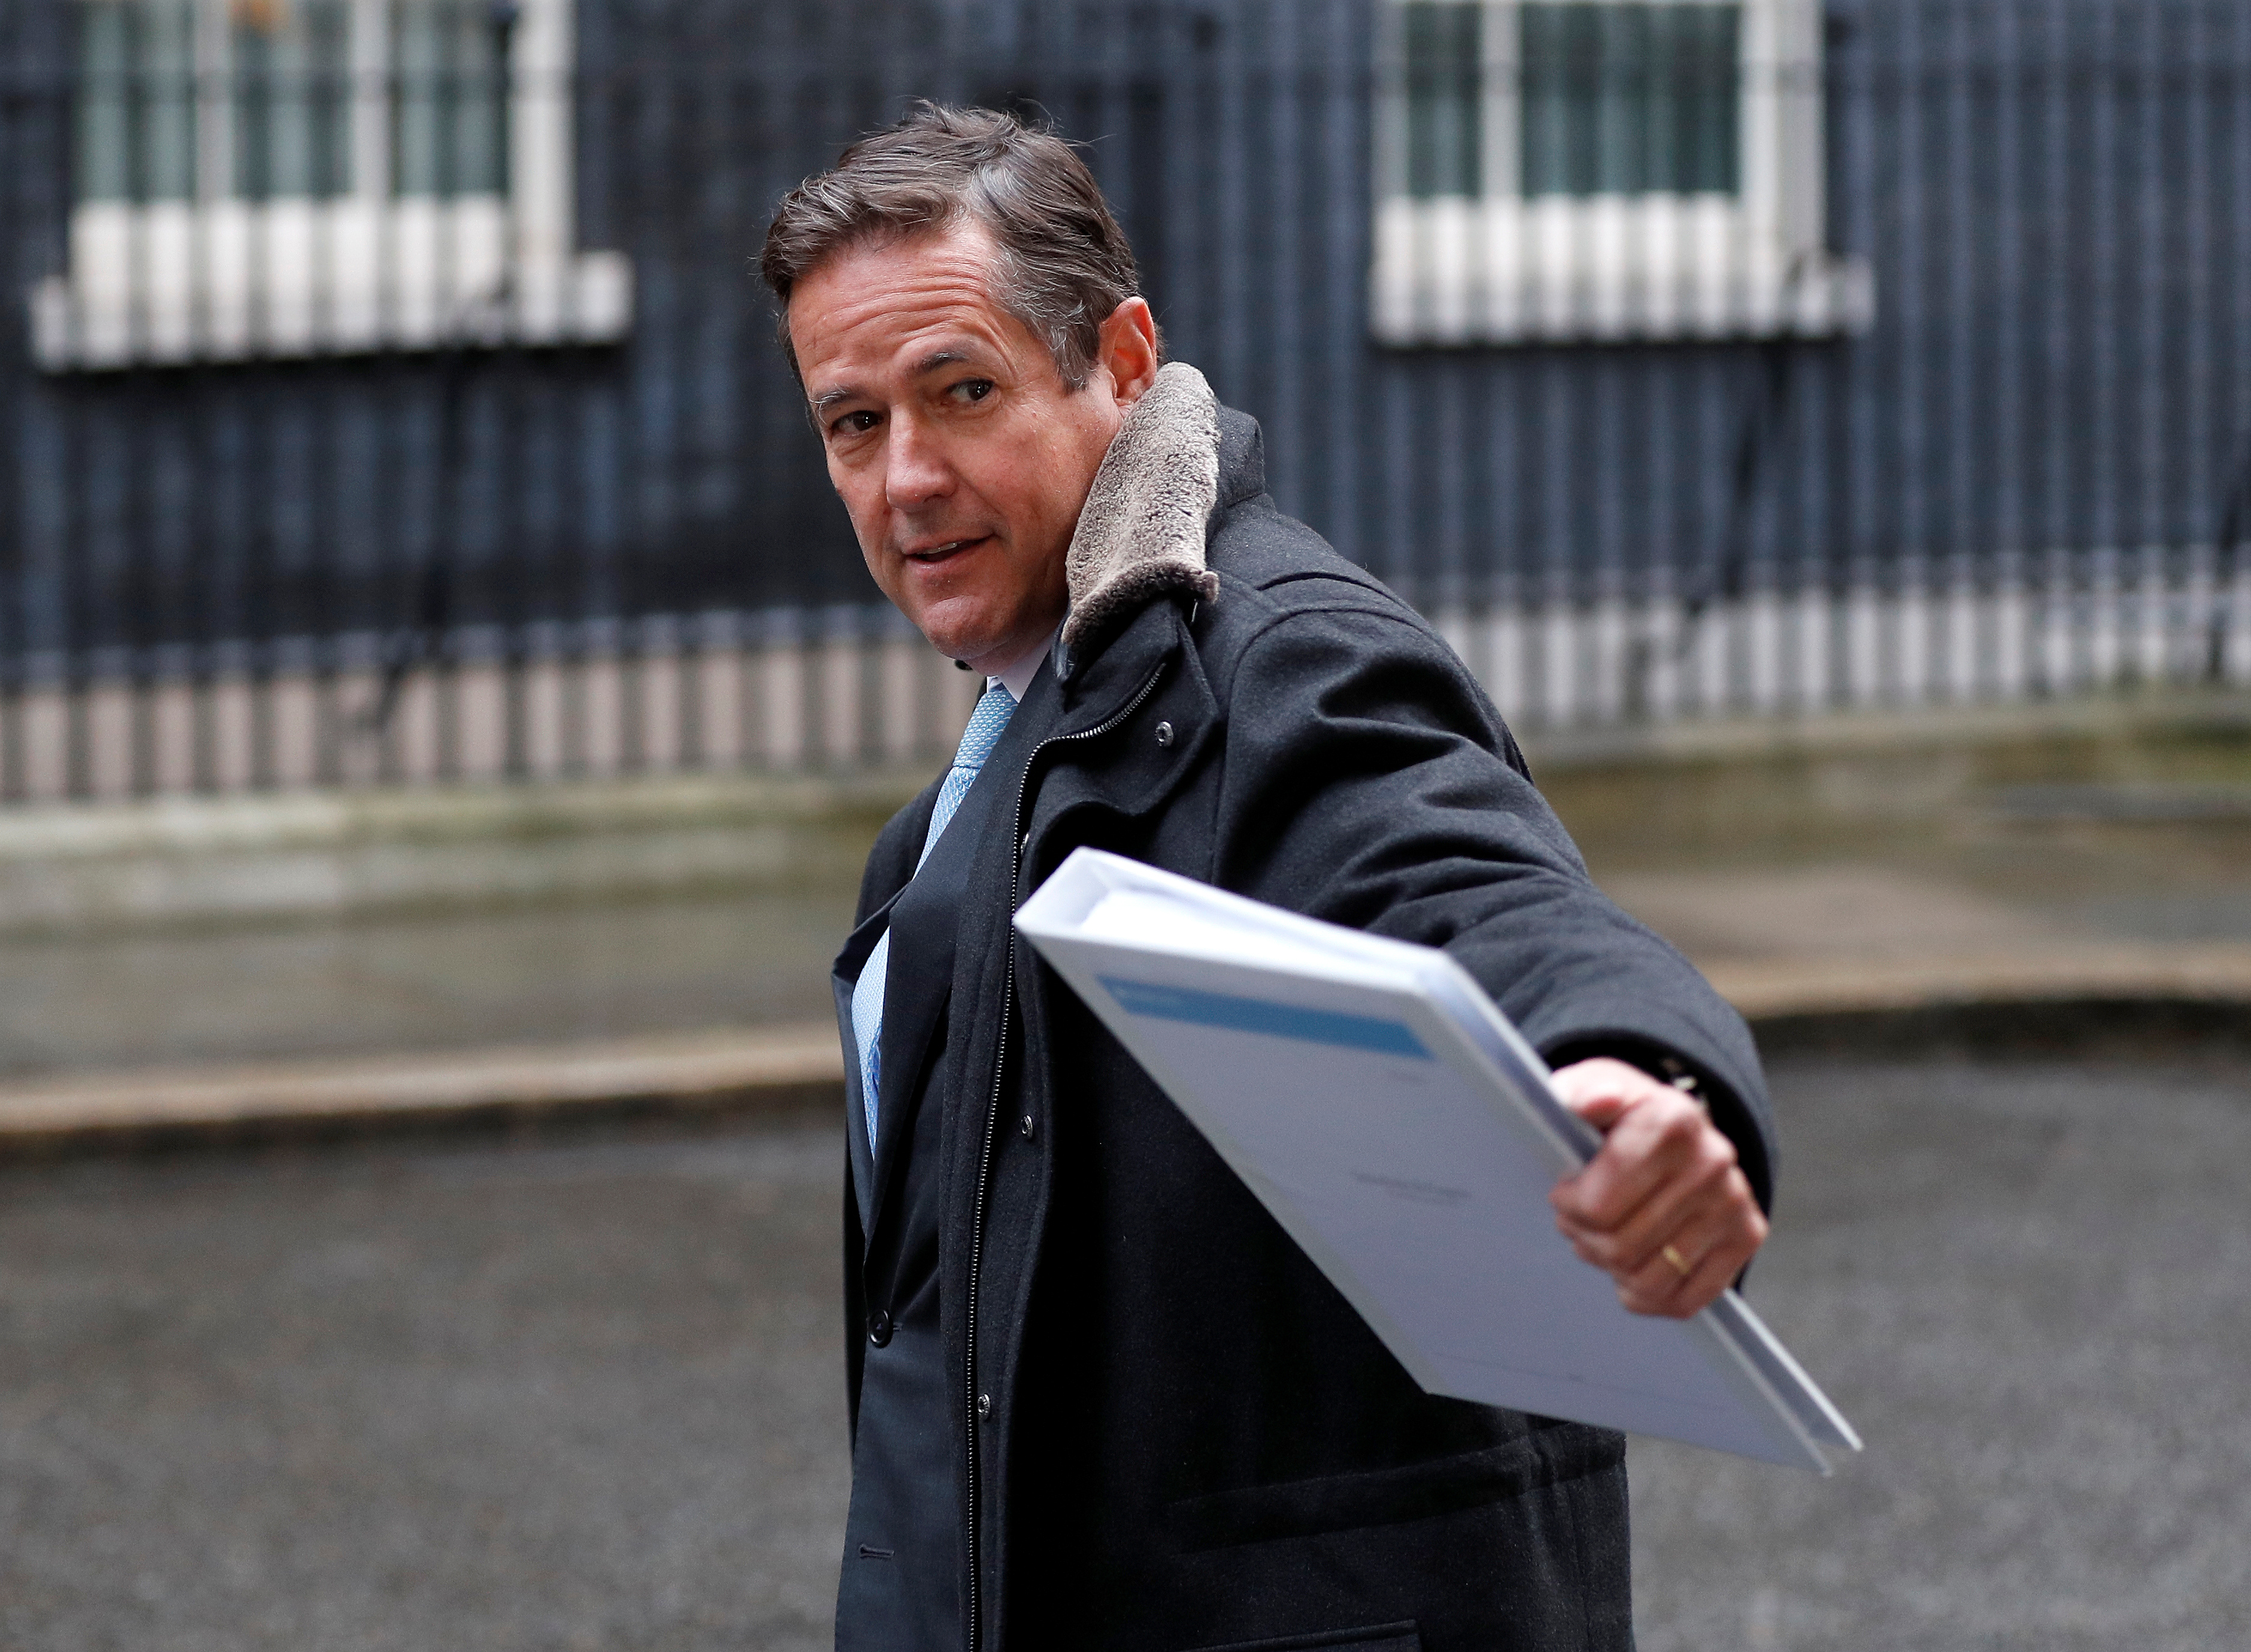 Barclays' CEO Jes Staley arrives at 10 Downing Street in London